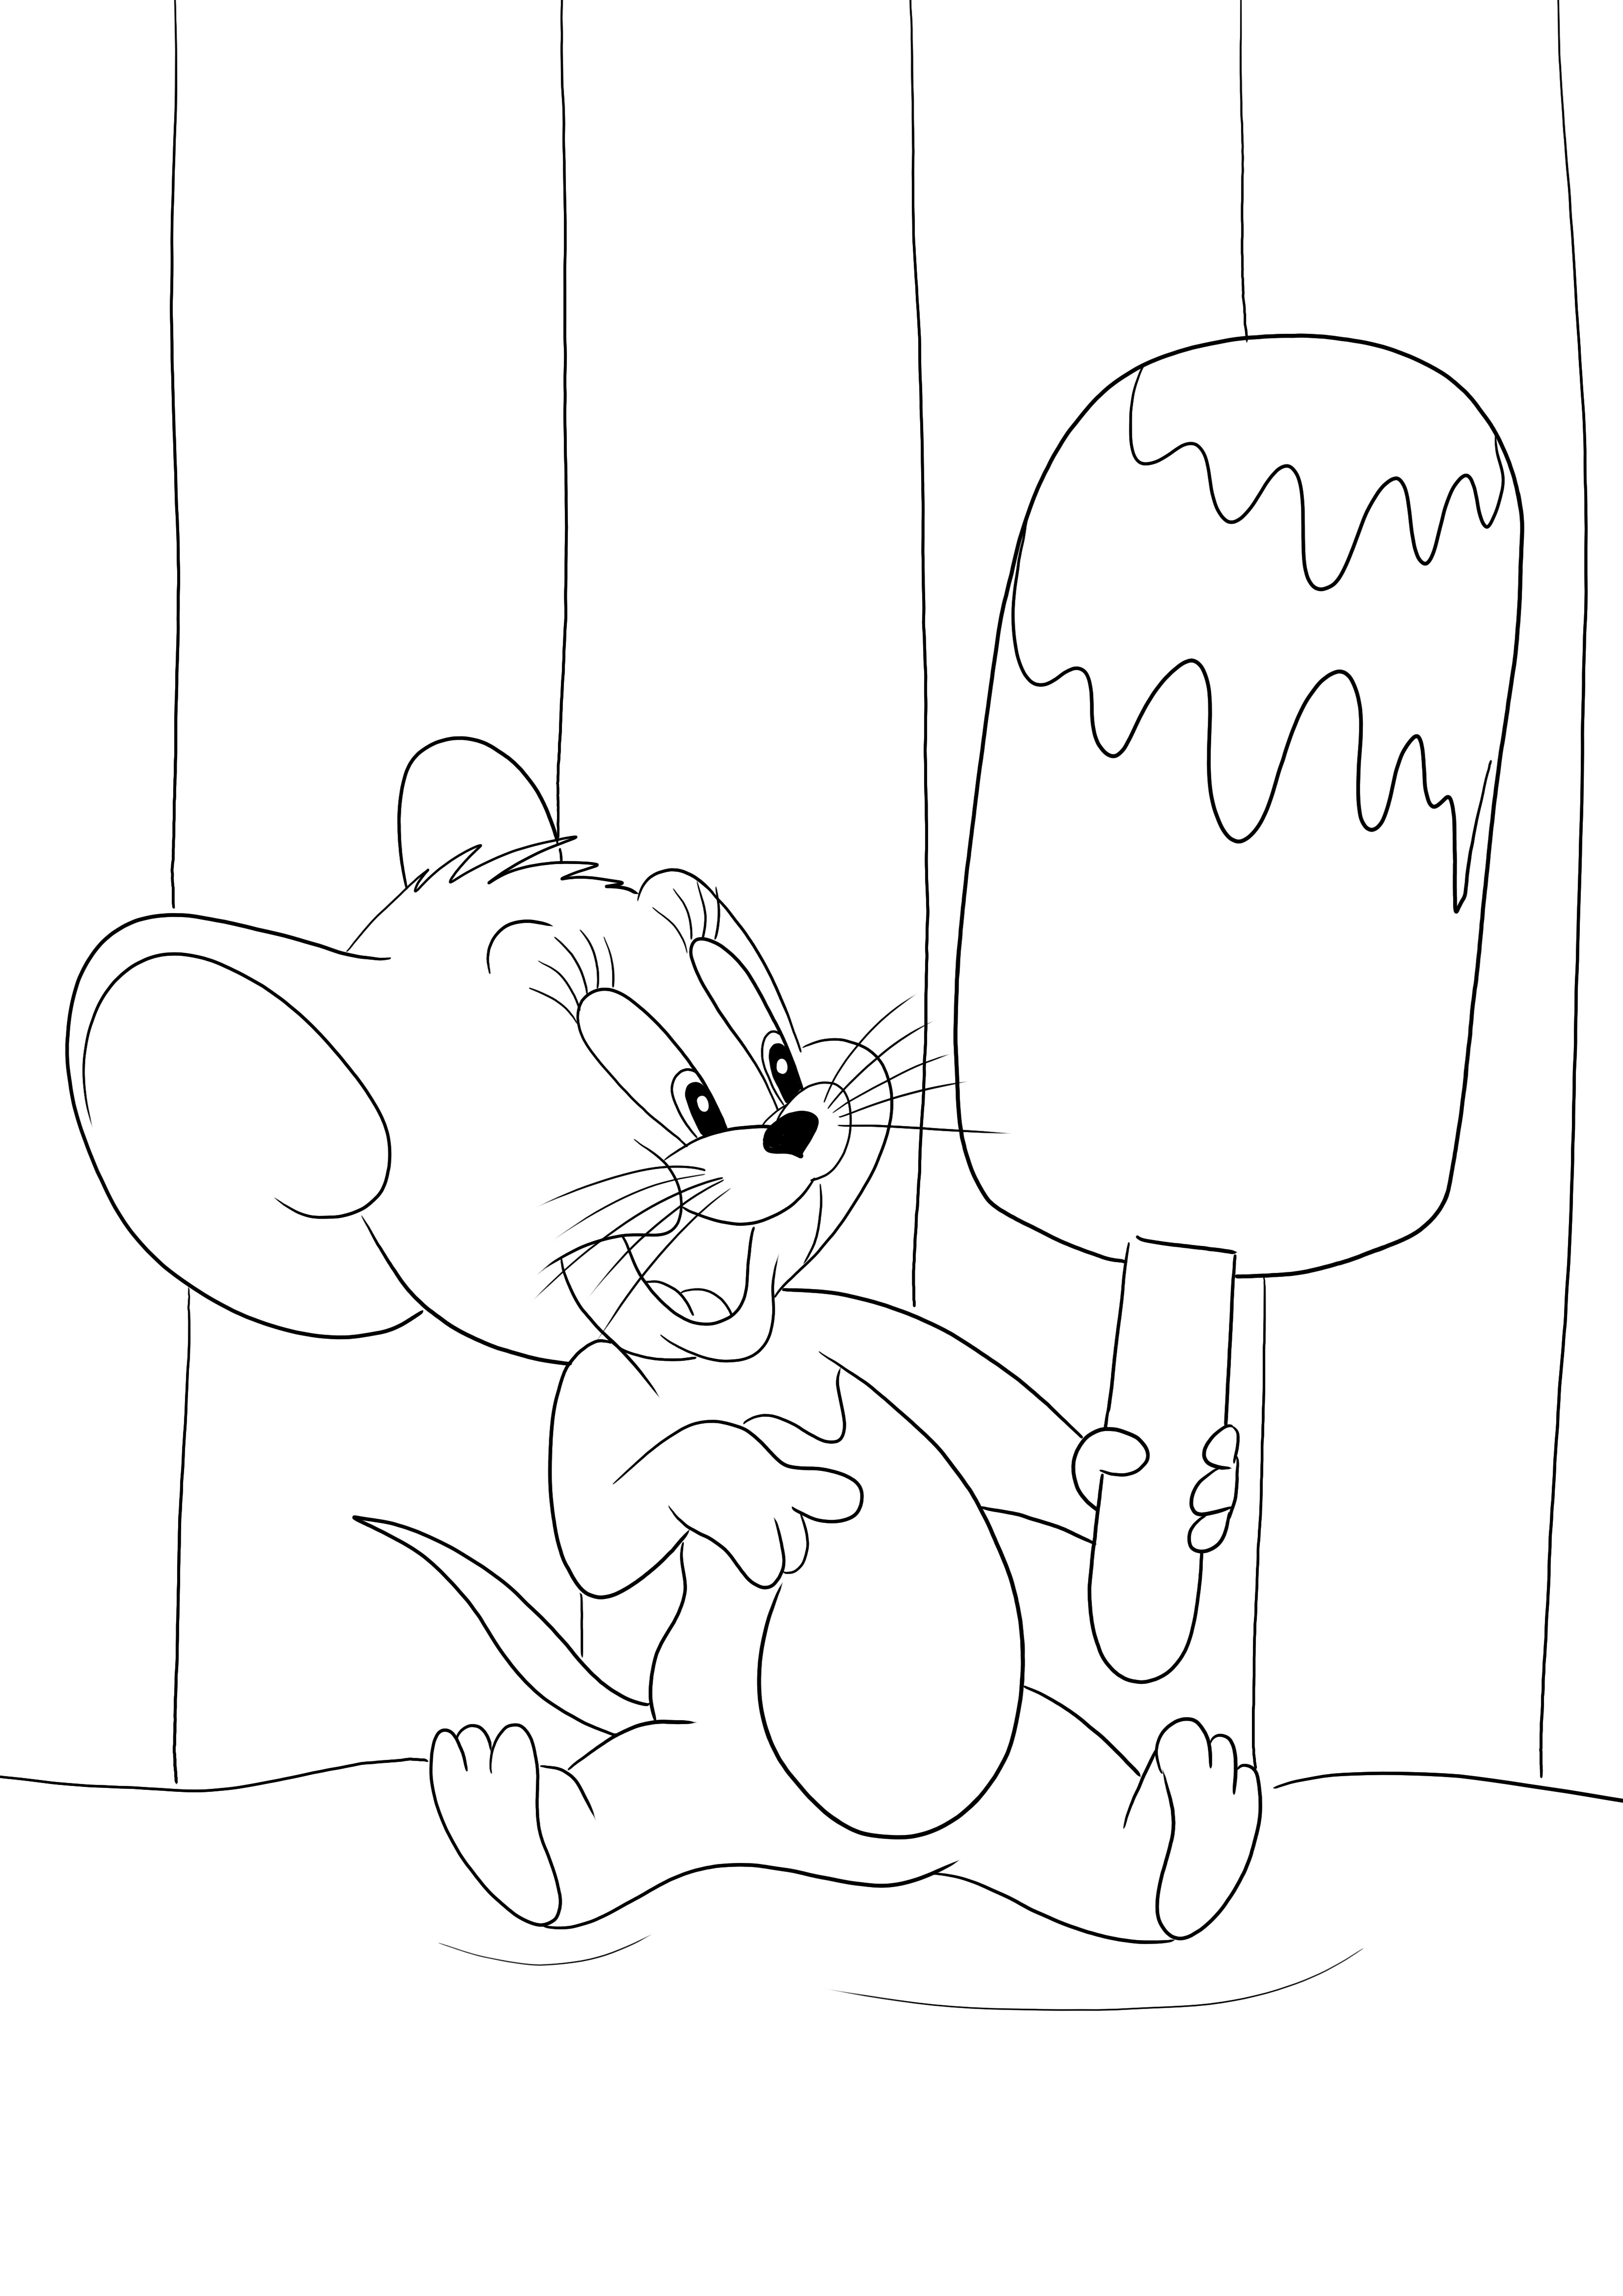 Jerry and his big ice cream is ready to be printed and colored by kids for free